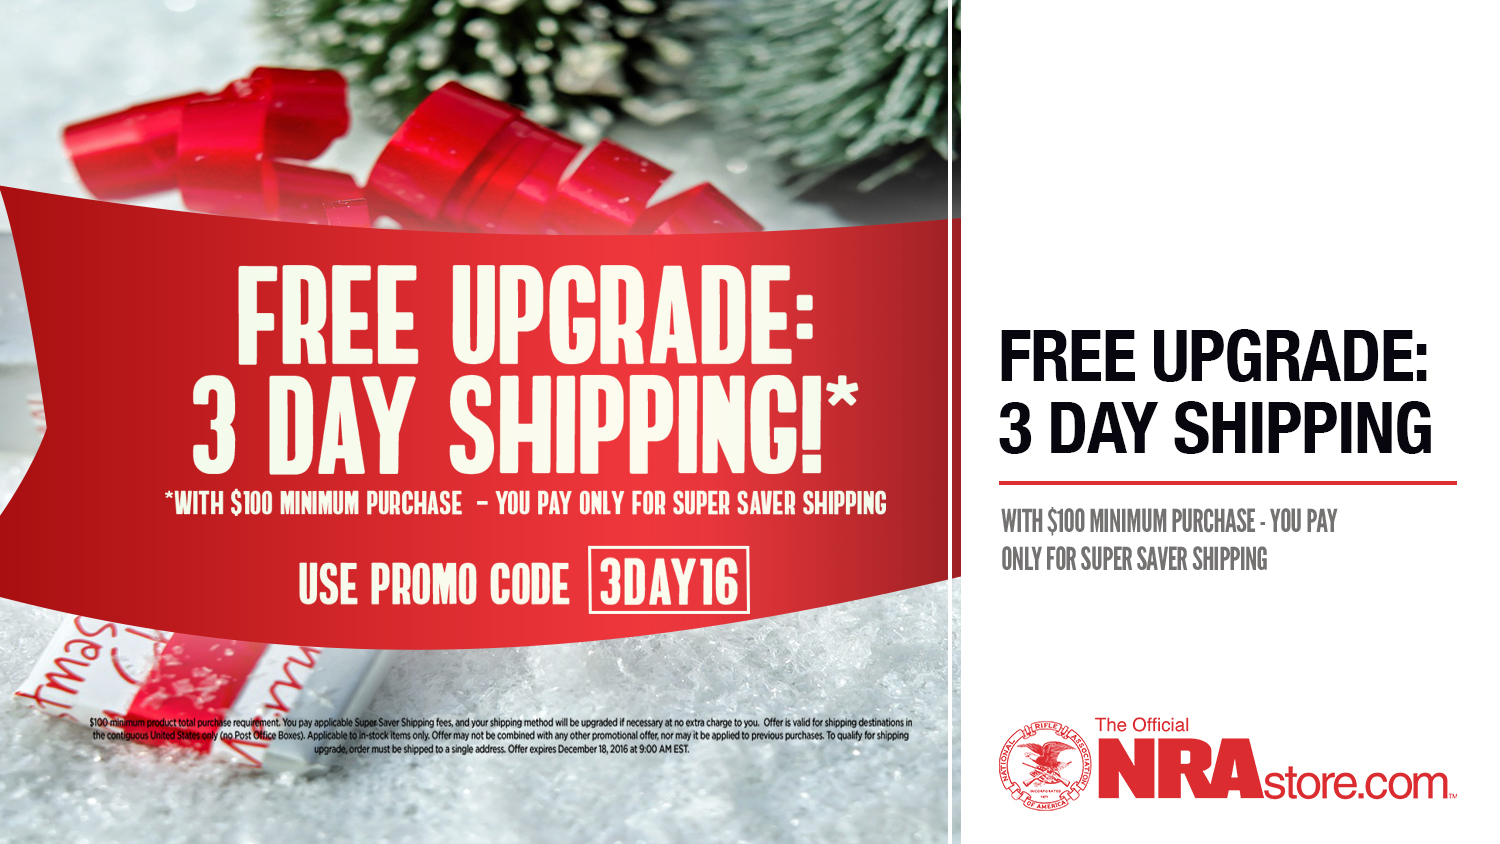 Free Upgrade to 3 Day Shipping at NRAstore